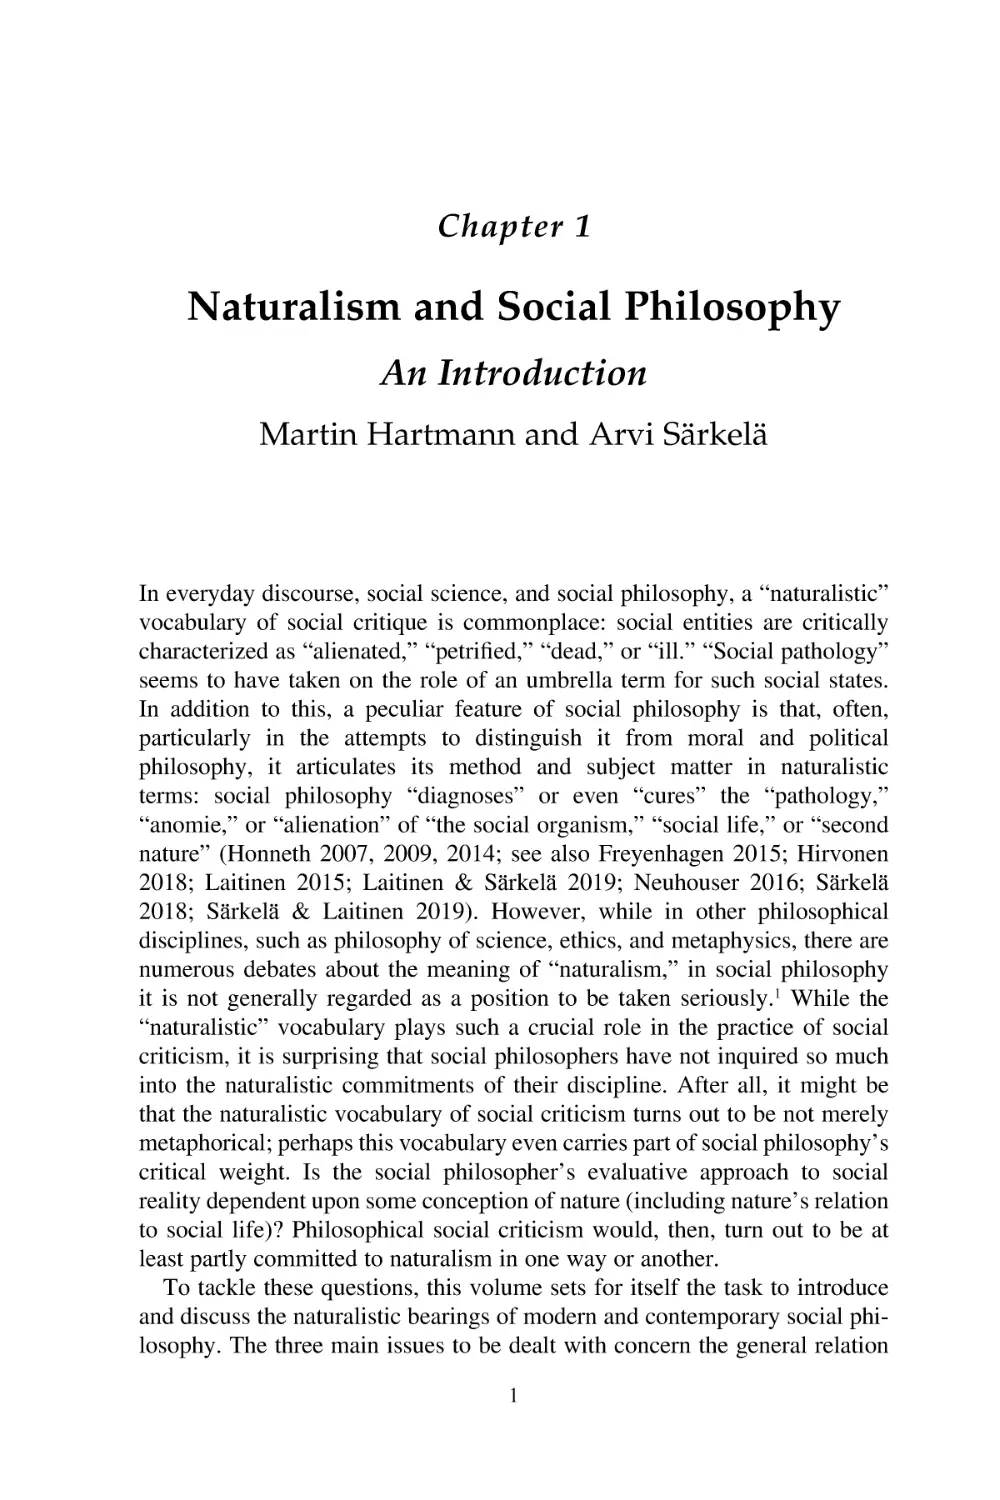 1 Naturalism and Social Philosophy